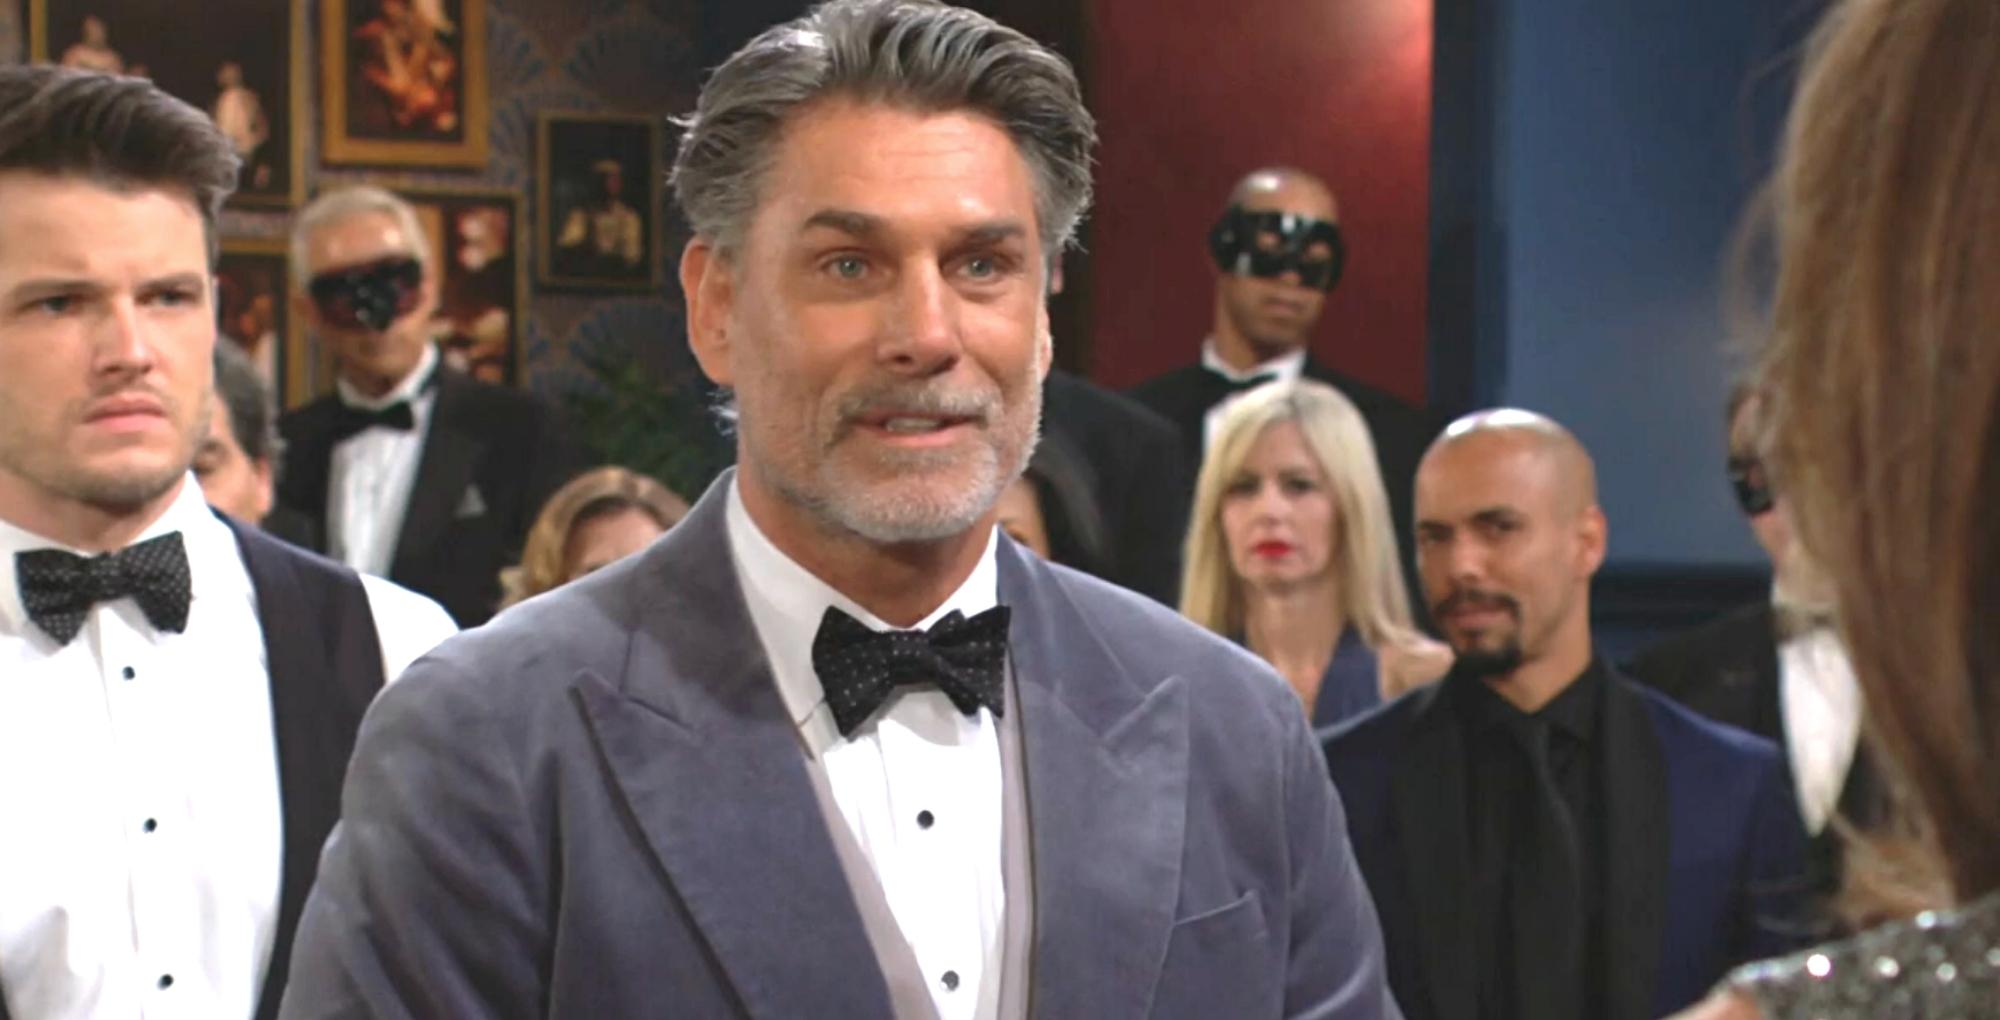 the young and the restless recap for march 30, 2023 has shocking news for all at the gala from jeremy stark